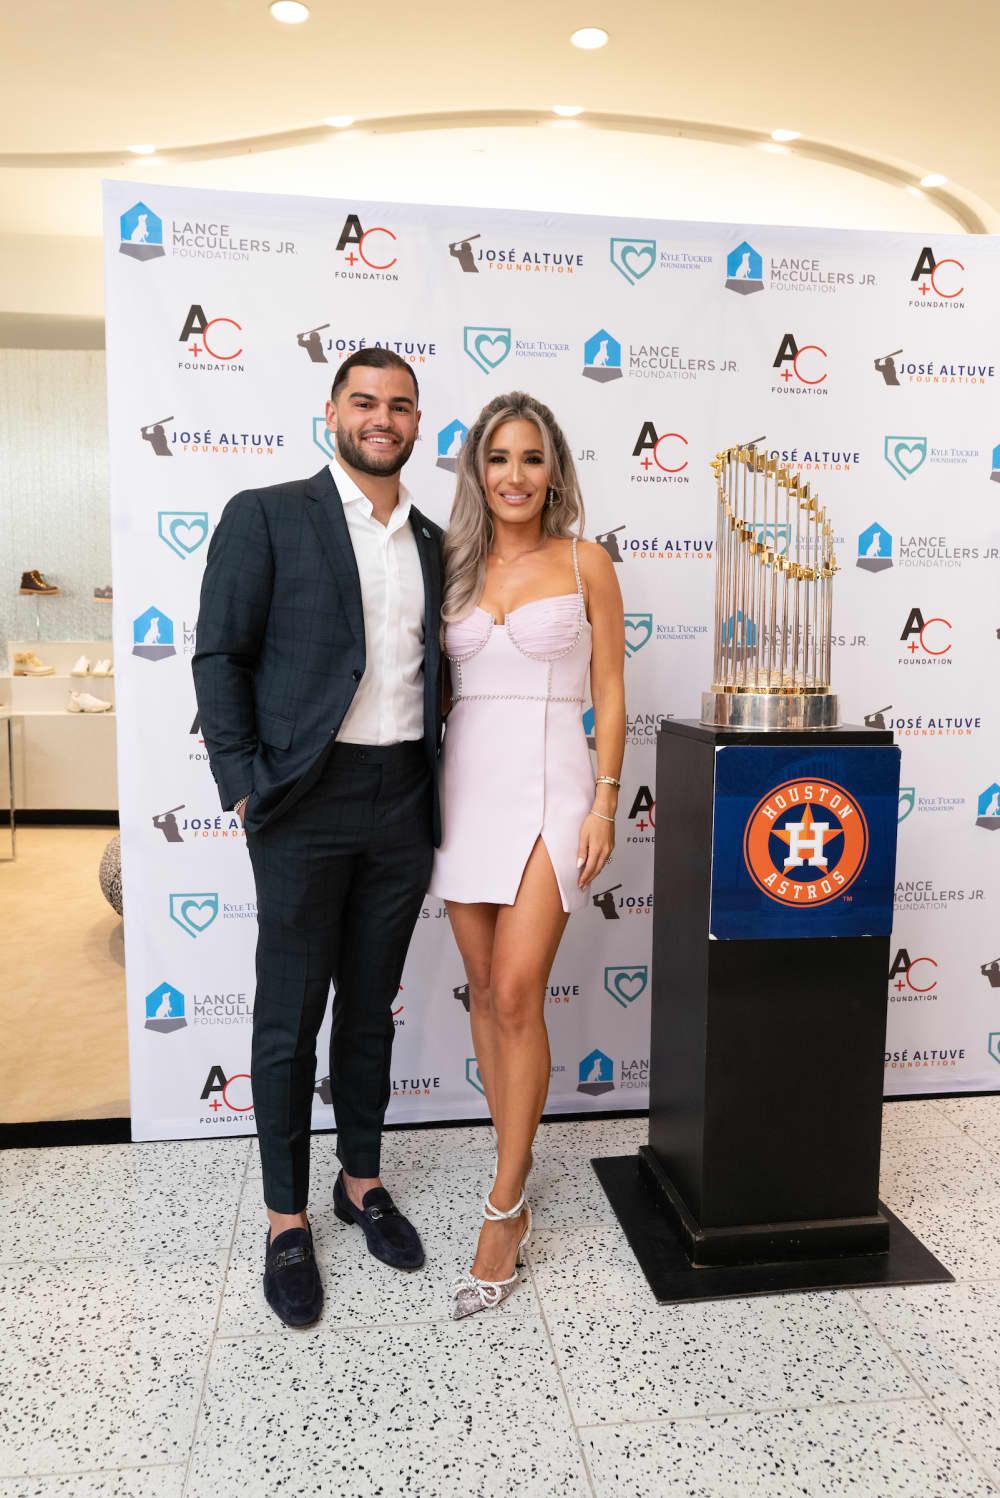 News — Lance McCullers Jr. Foundation